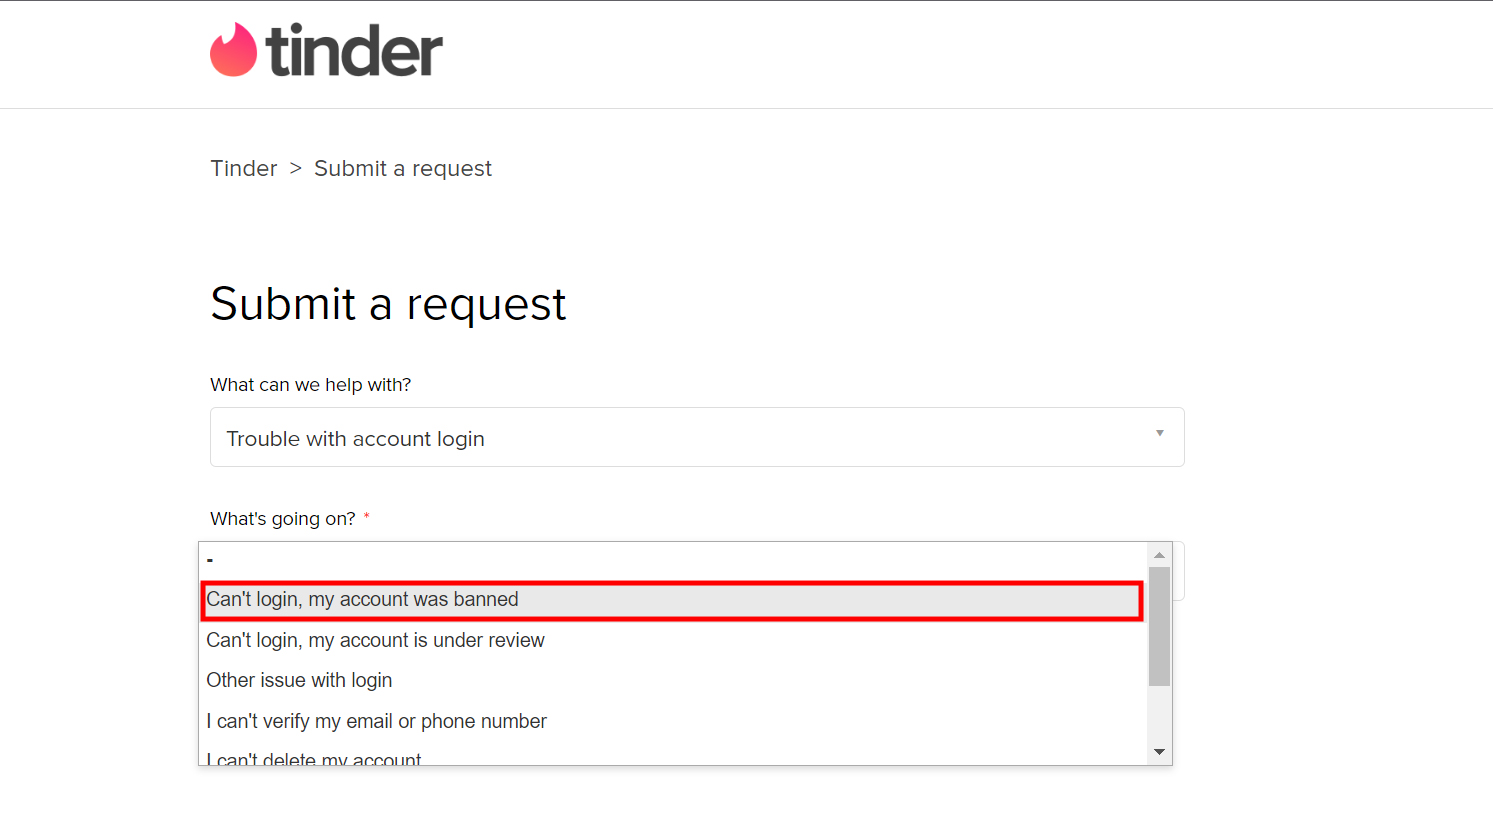 How to submit a Tinder request to get account unbanned (2)